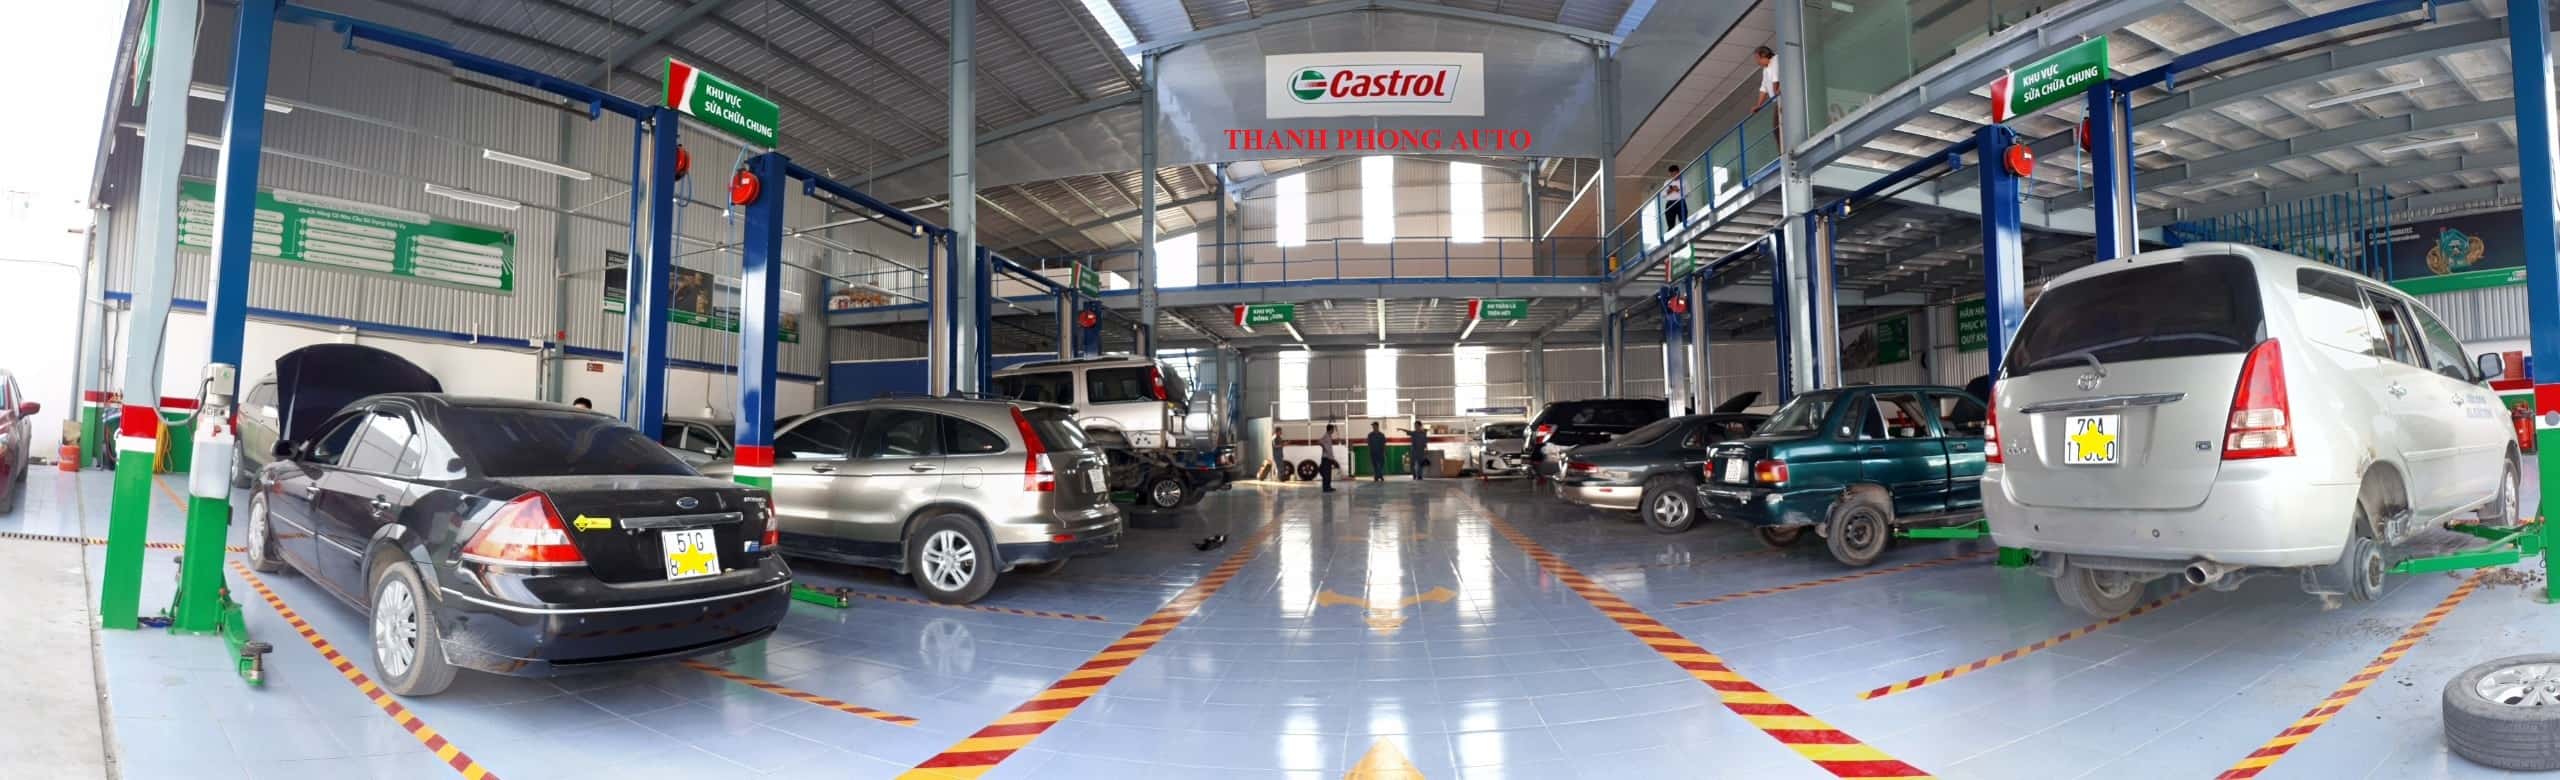 Insurance For "Dear Driver" - Let Us Take Care Of Professional Garage Thanh Phong Auto HCM 2022